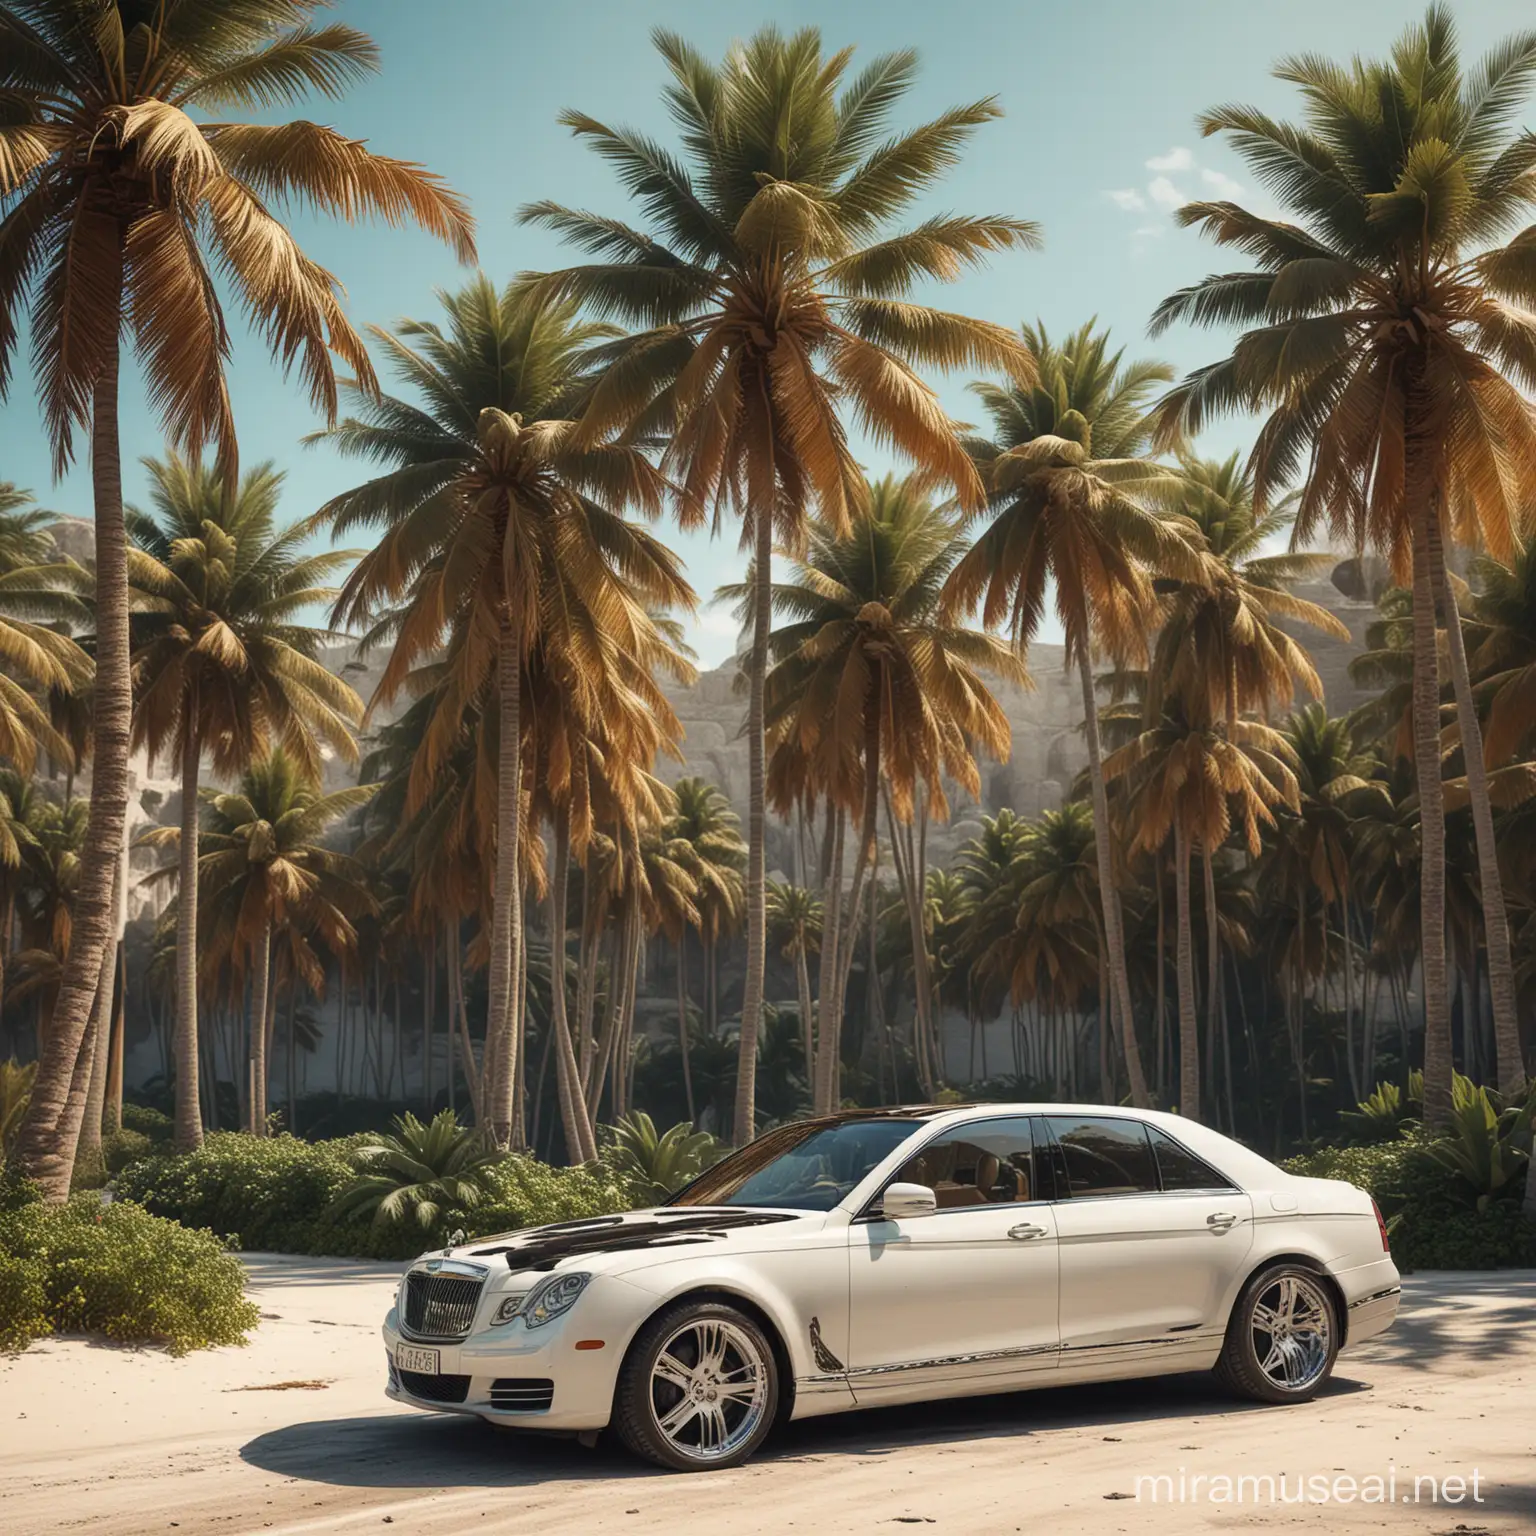 create summer textures with beaches and palm trees and a luxury car in between